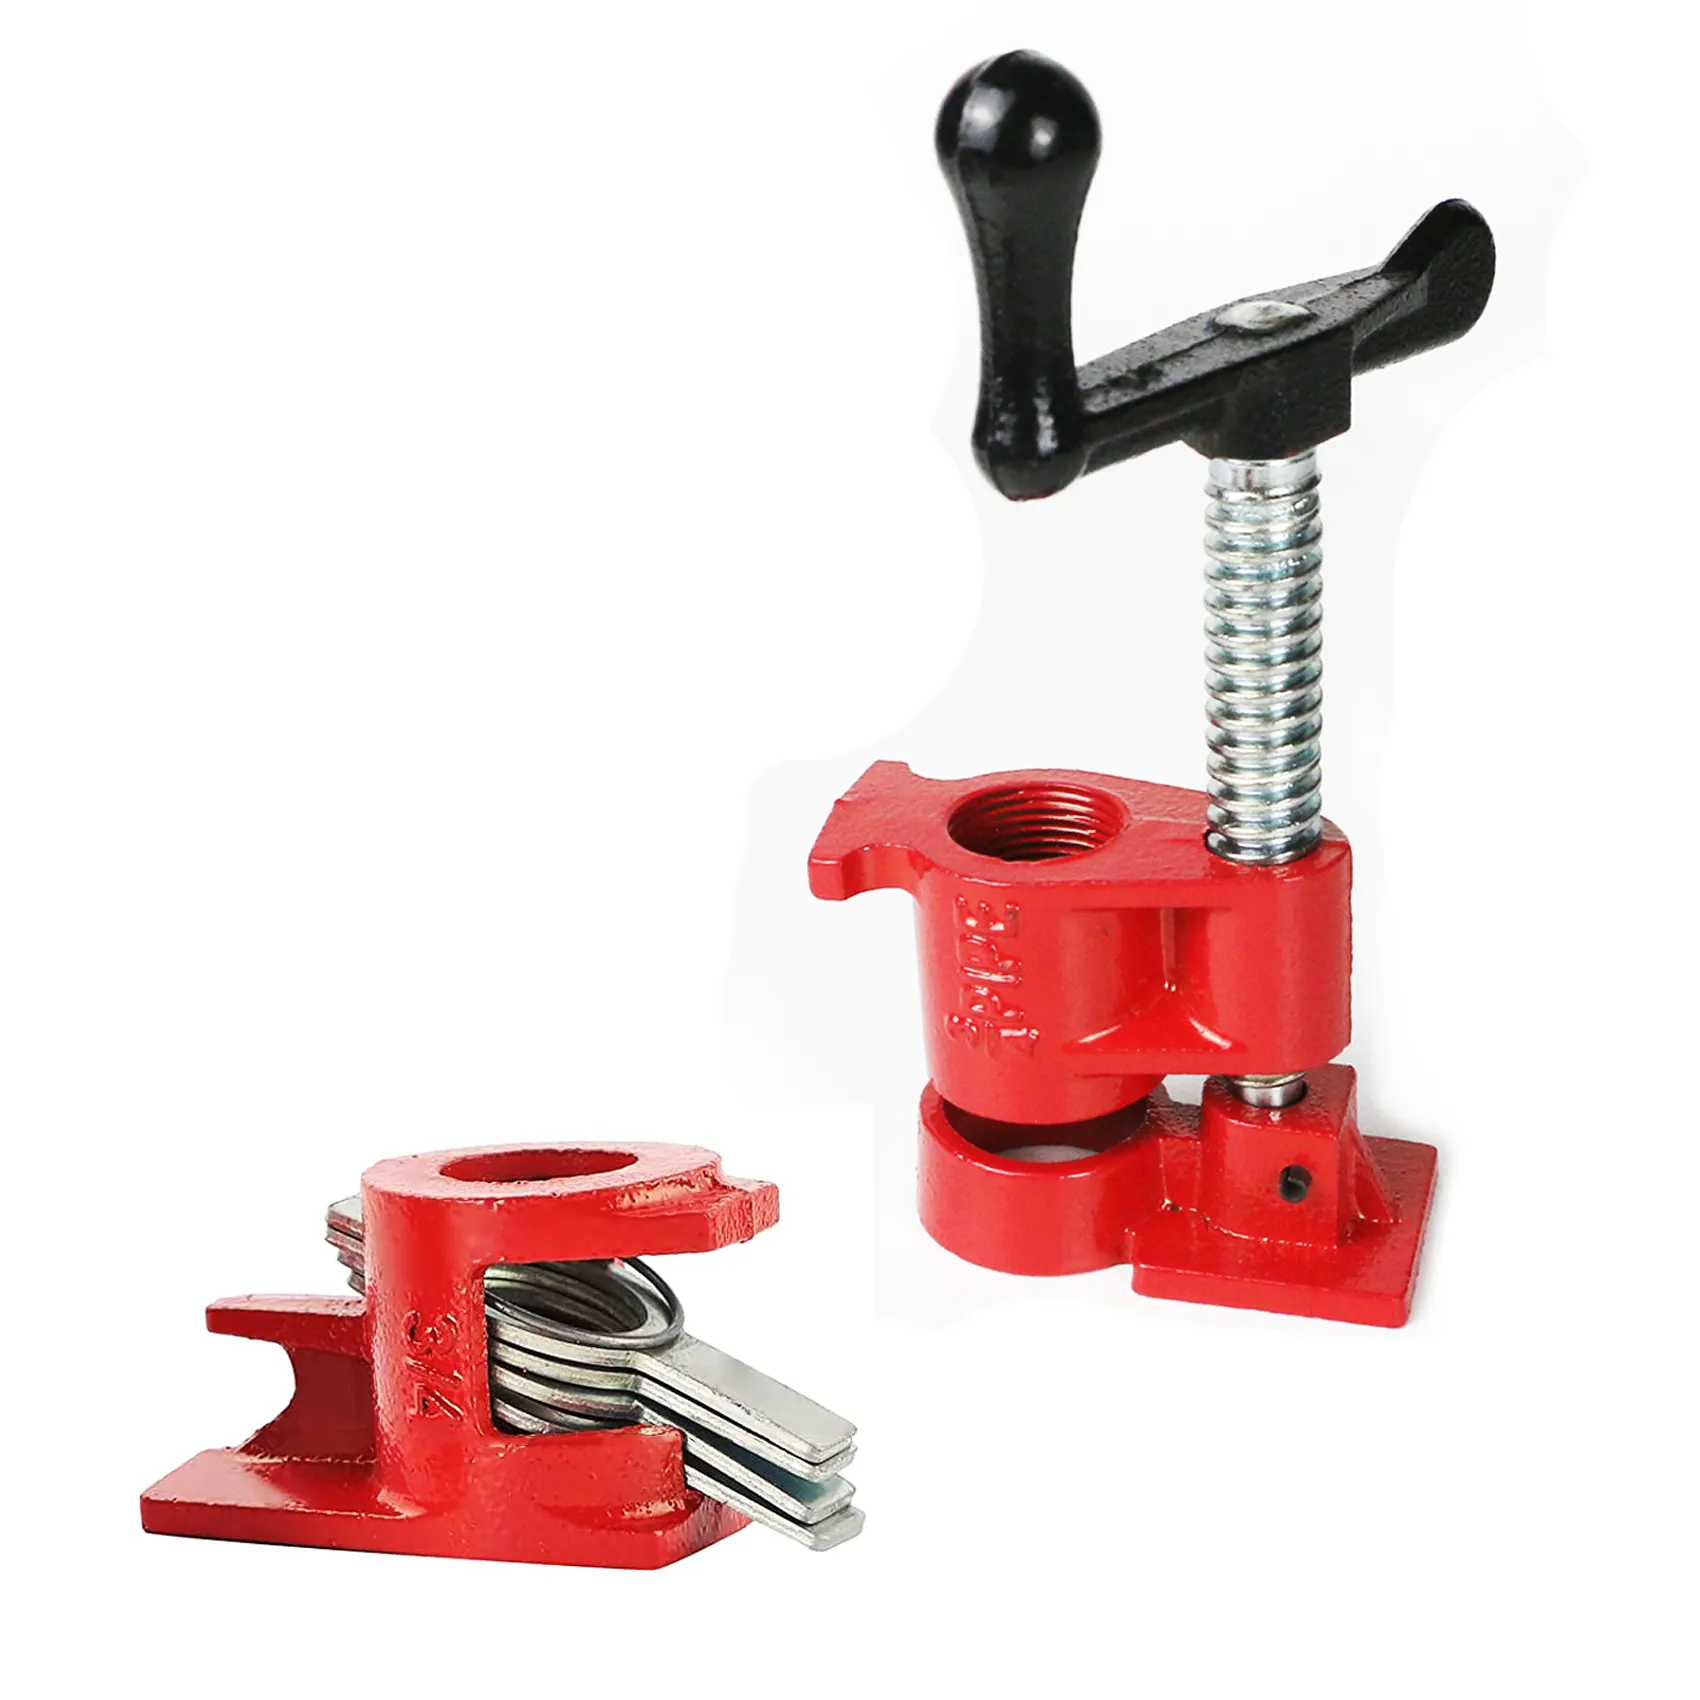 Heavy Duty H type 3/4" Wood Gluing Pipe Clamp Set Pipe Clamps for Wood Working